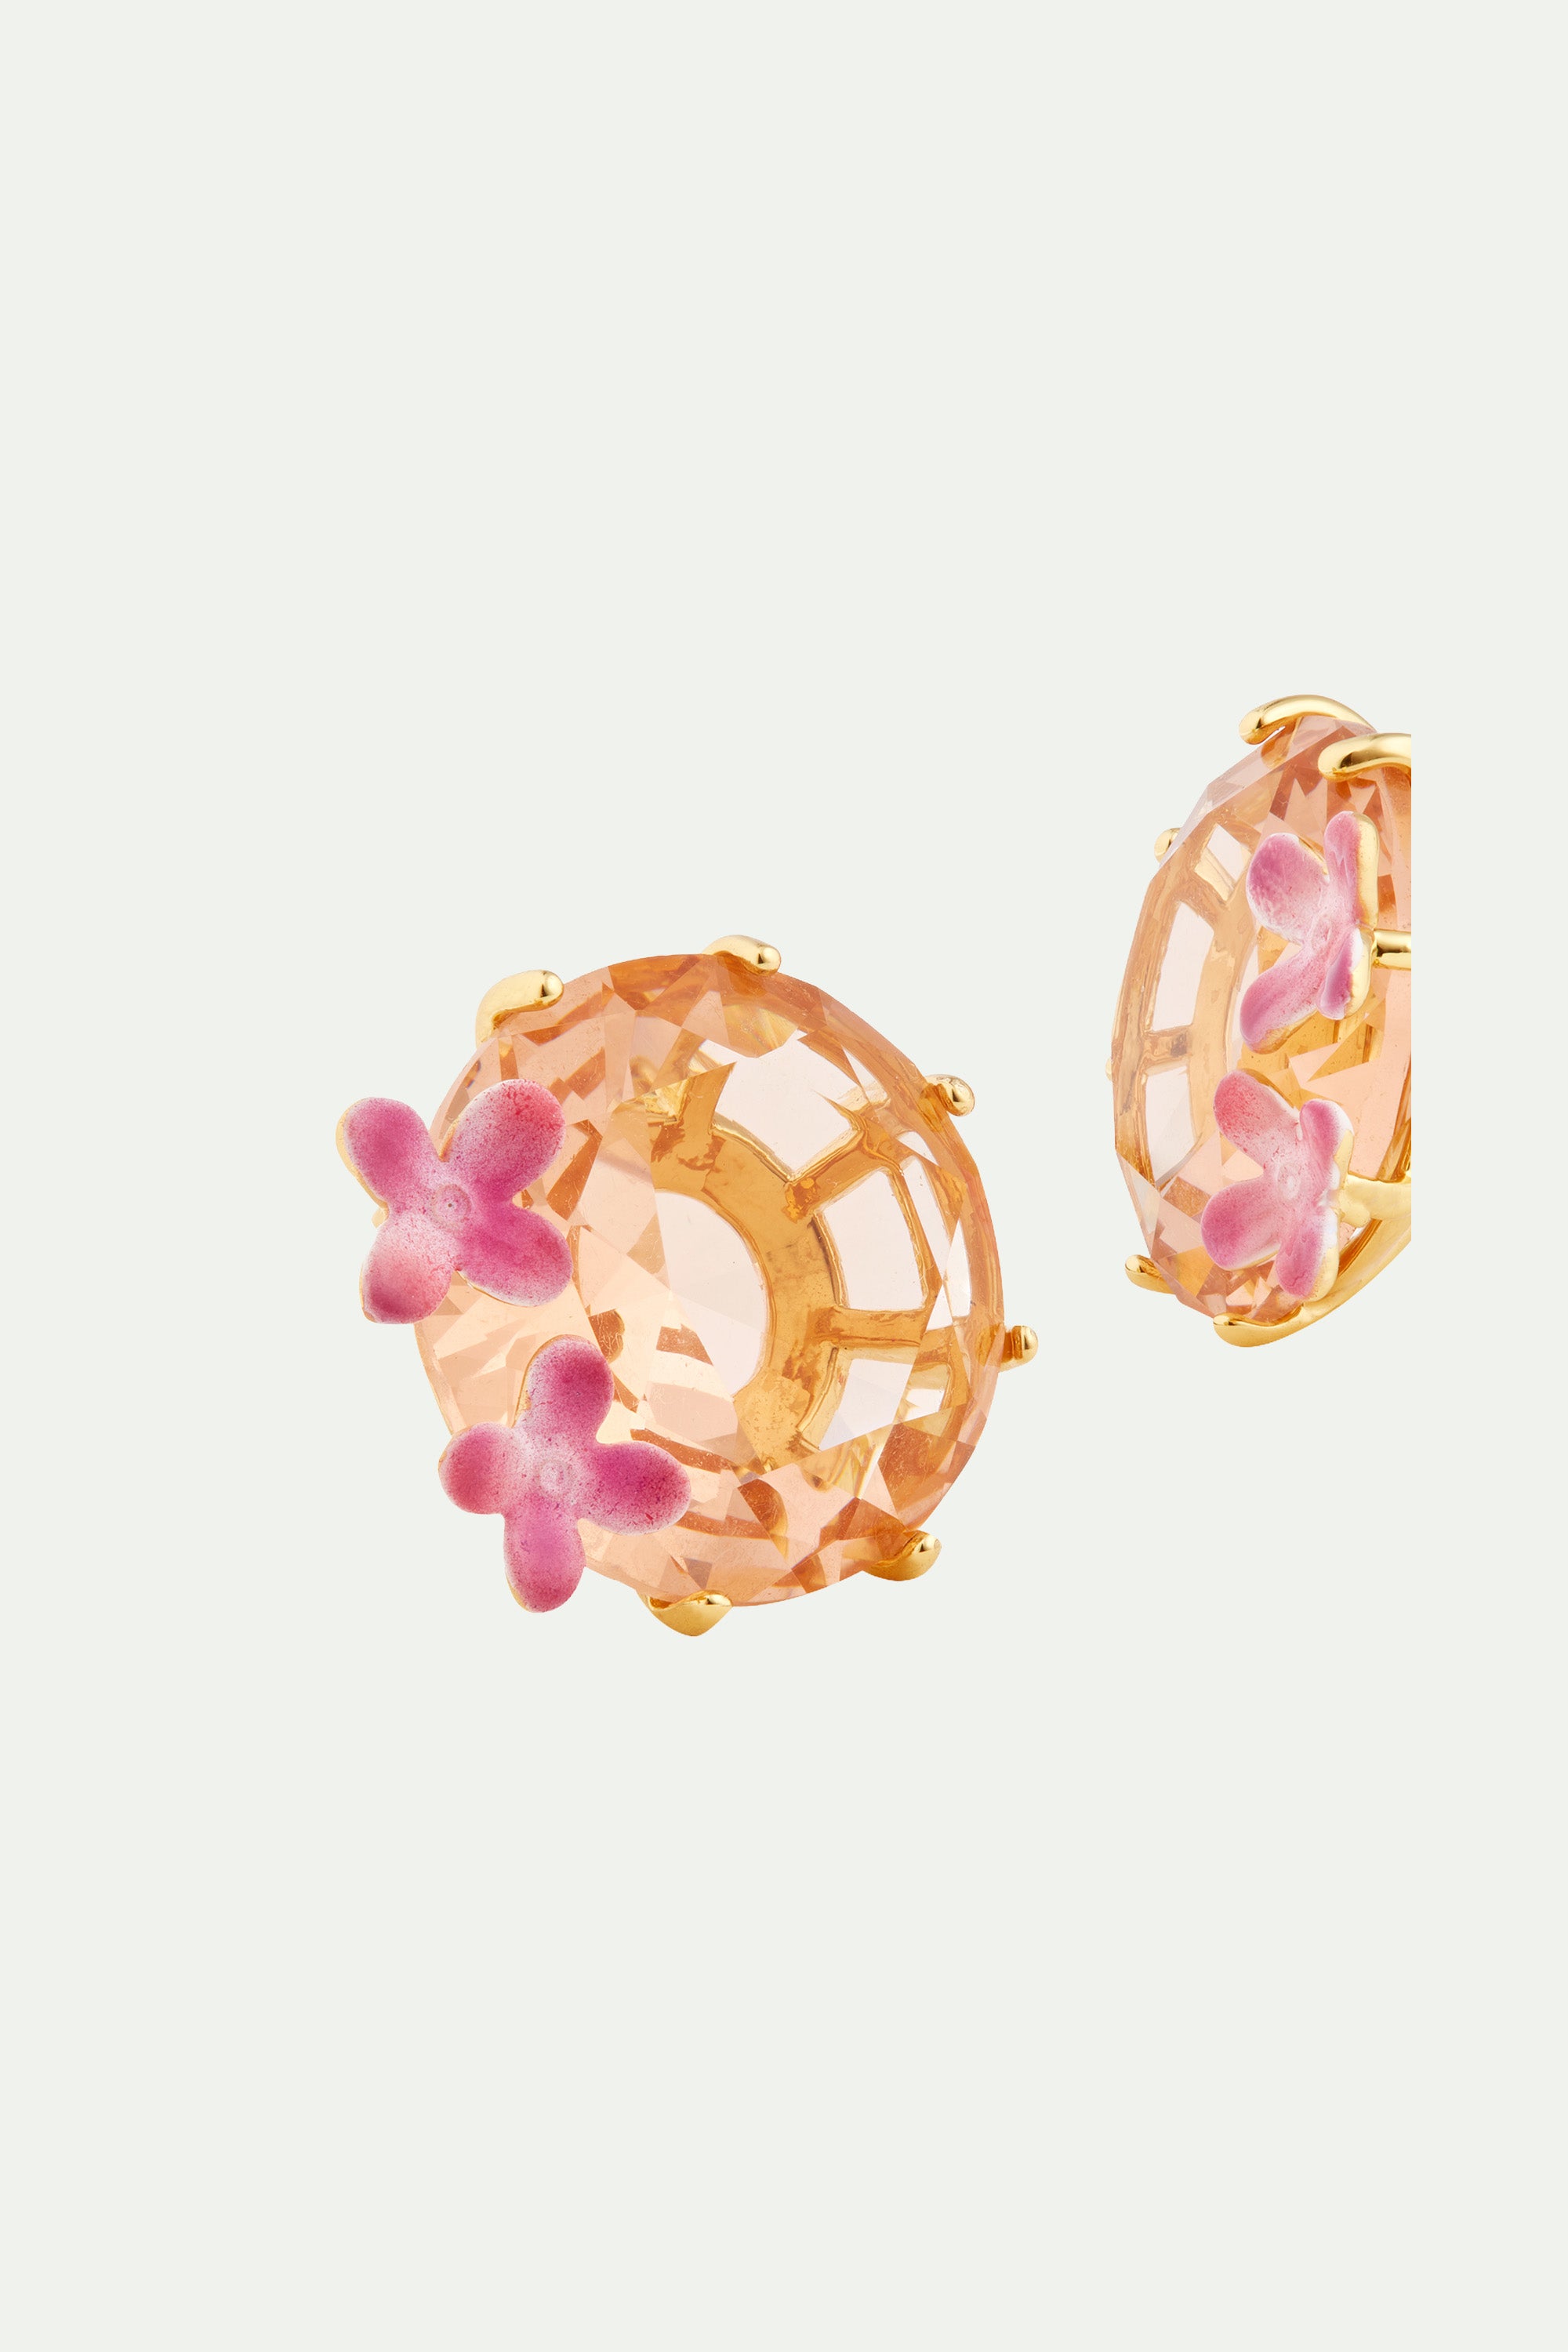 Apricot pink diamantine flower and round stone sleeper earrings